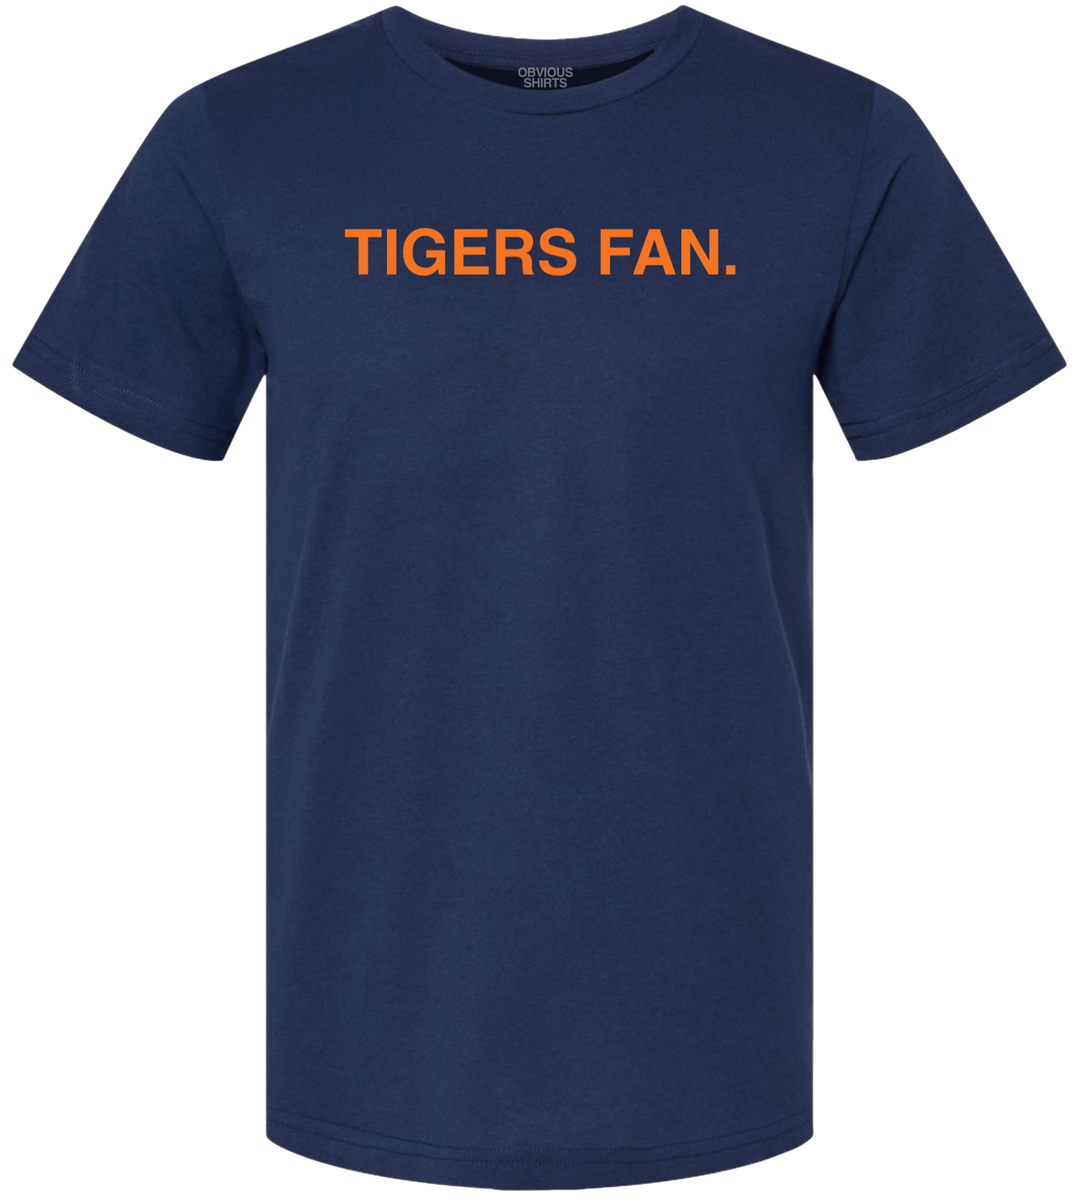 TIGERS FAN. - OBVIOUS SHIRTS